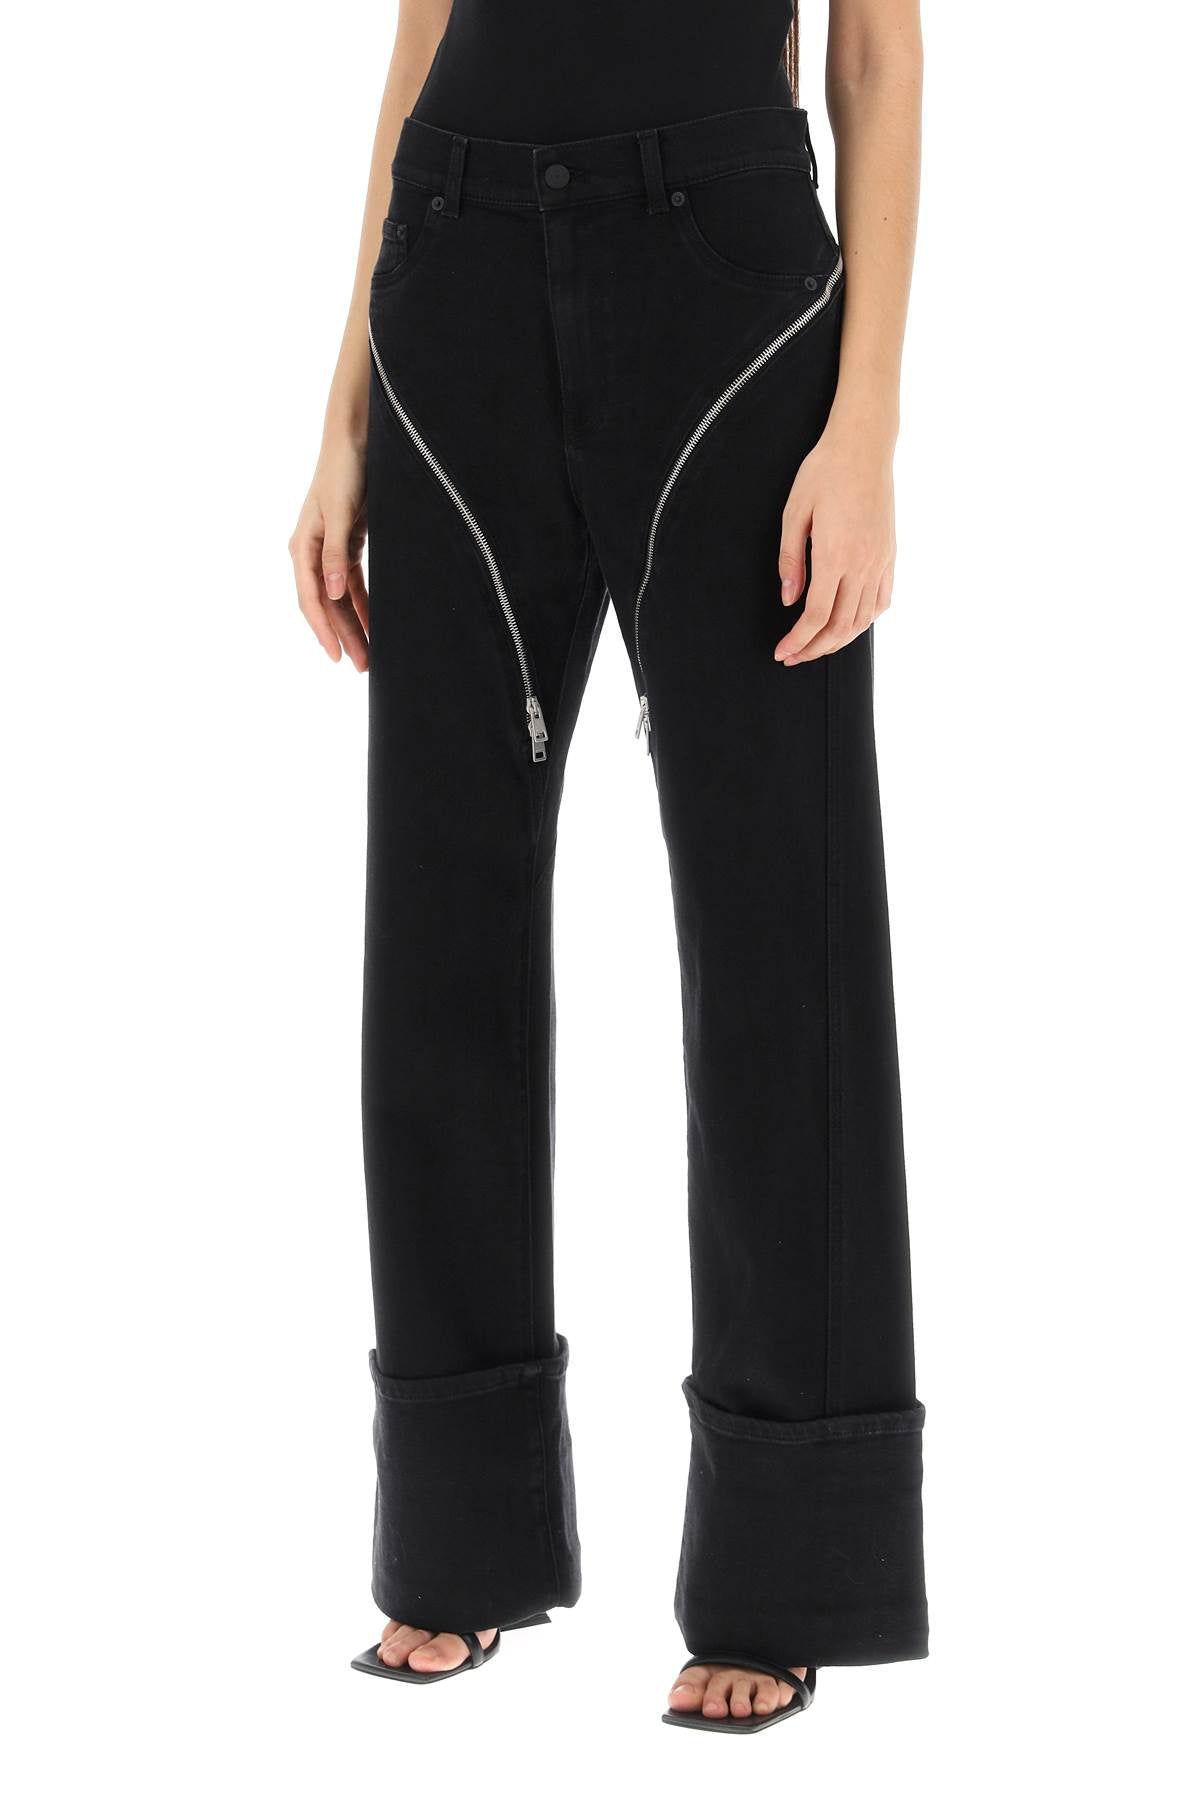 Mugler straight jeans with zippers-3